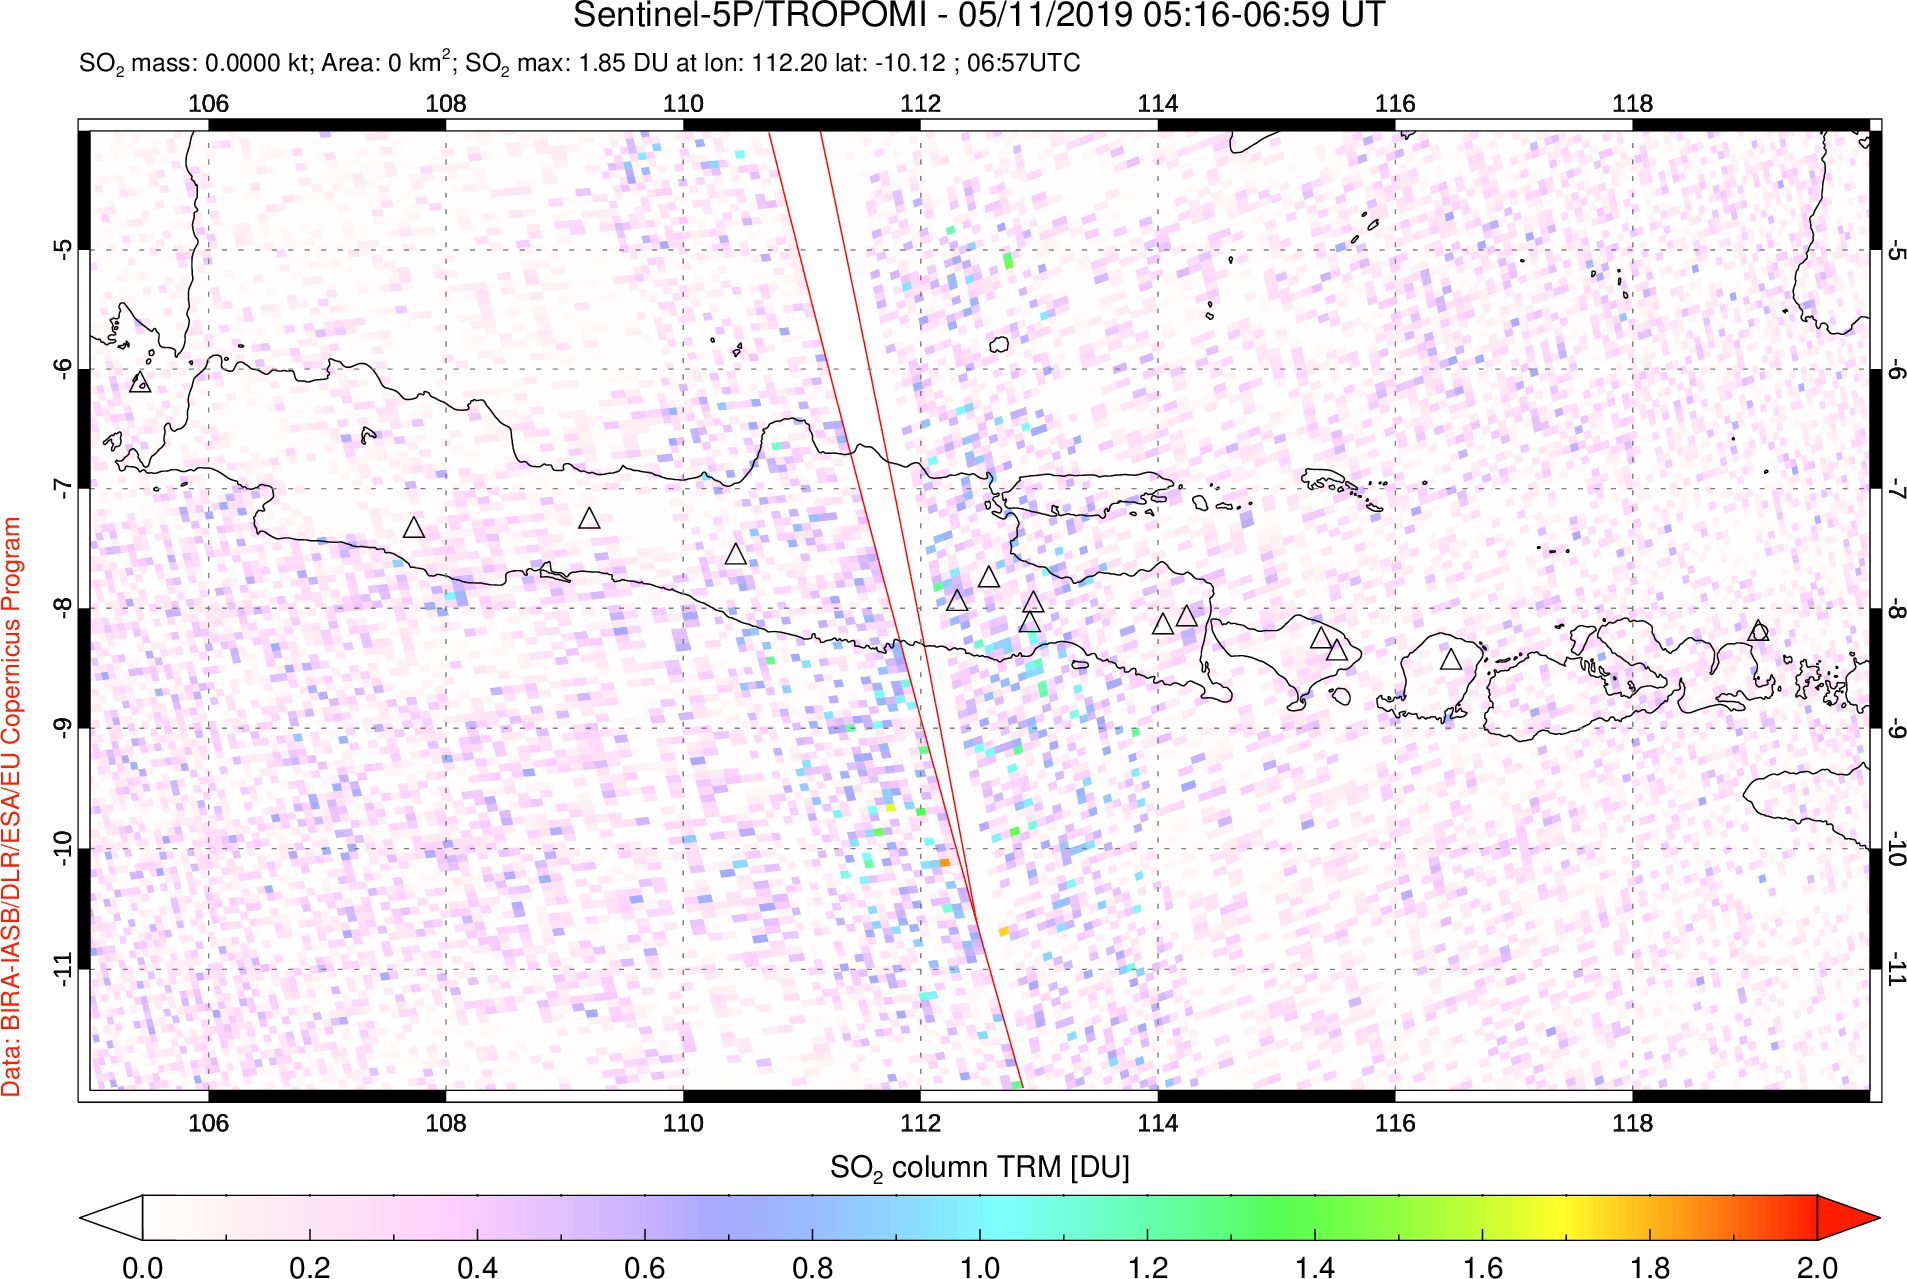 A sulfur dioxide image over Java, Indonesia on May 11, 2019.